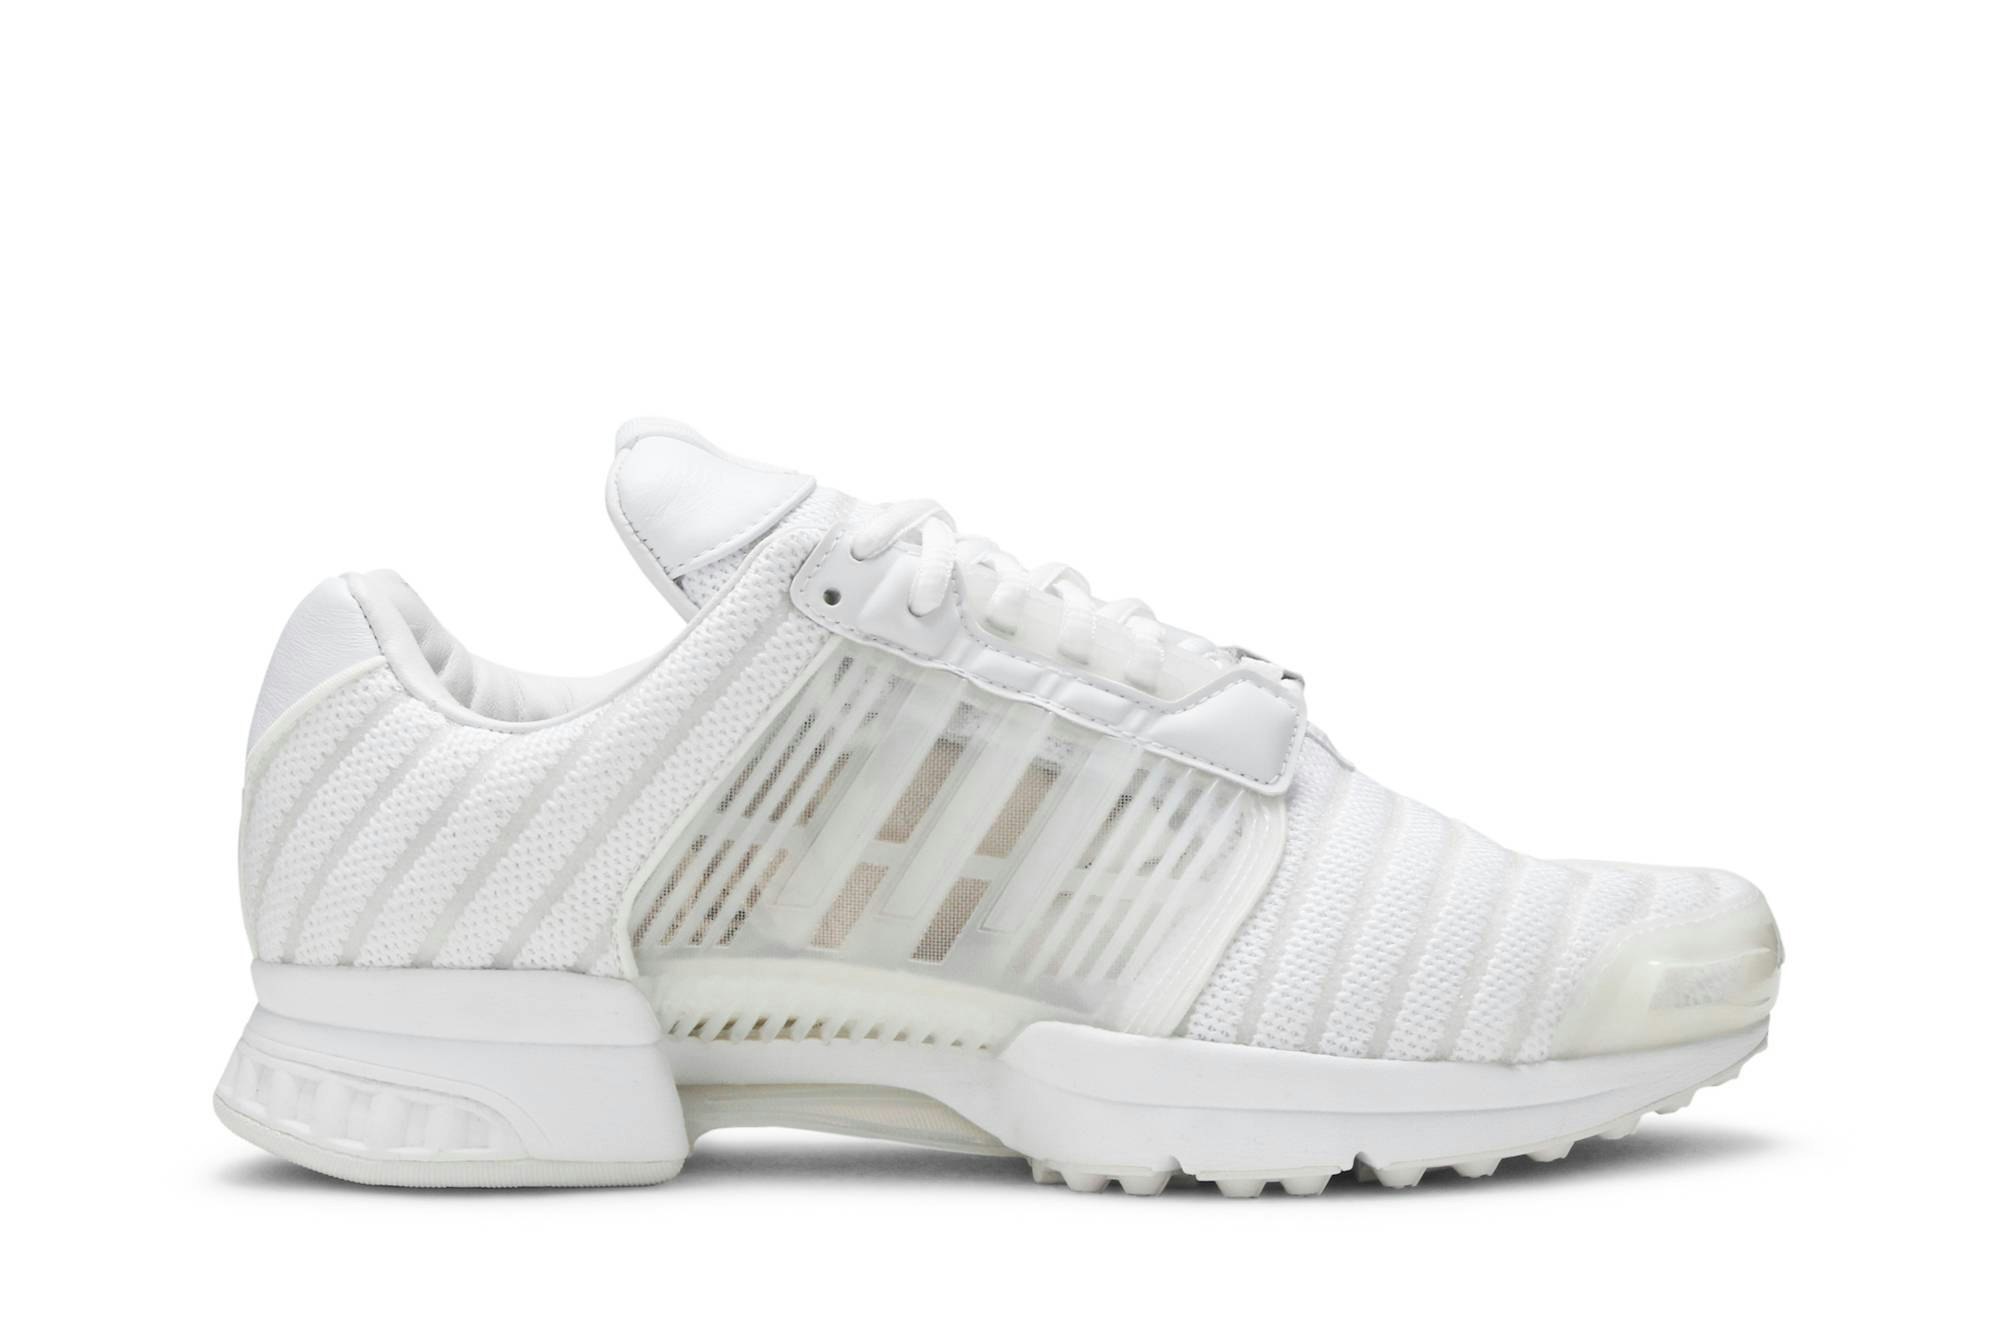 adidas Climacool Vento BOOST White Black Silver Men Unisex Running Shoes  H67643 | Kixify Marketplace